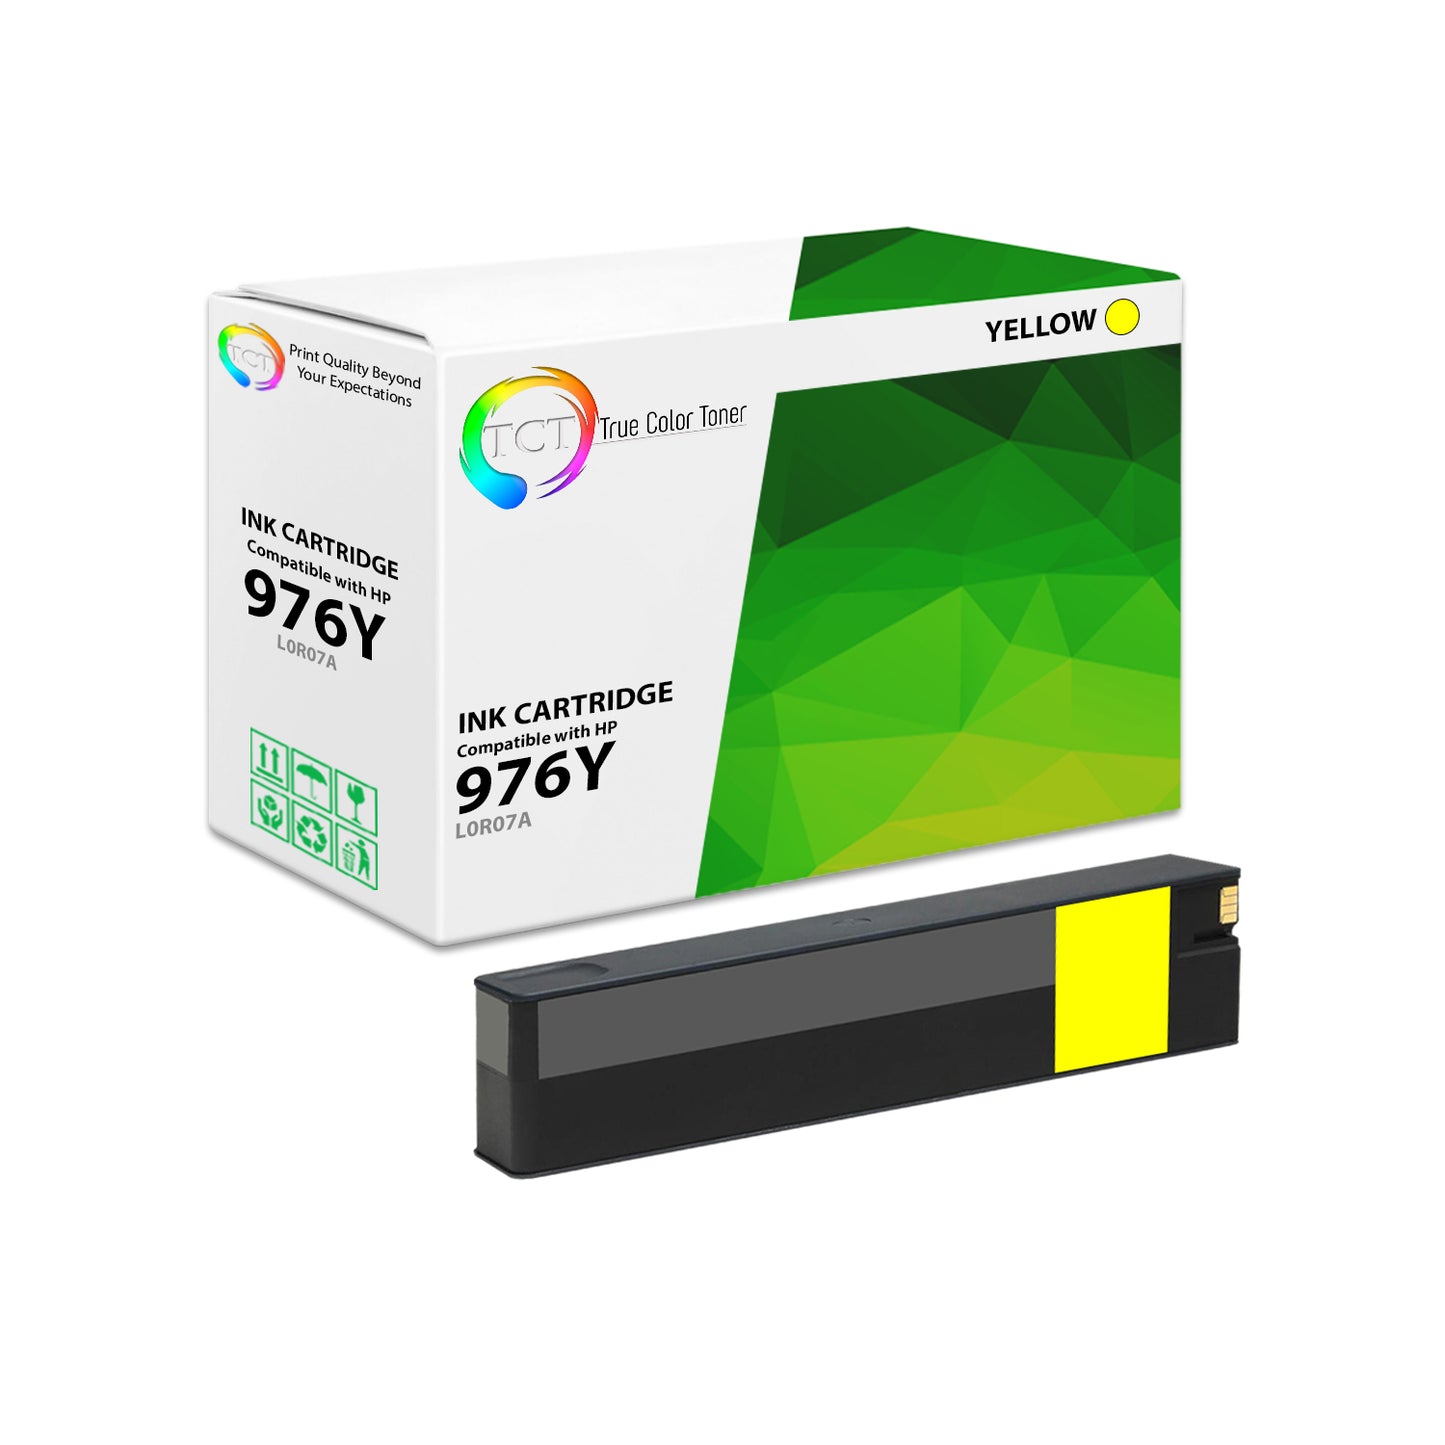 TCT Compatible Extra High Yield Ink Cartridge Replacement for the HP 976Y Series - 1 Pack Yellow